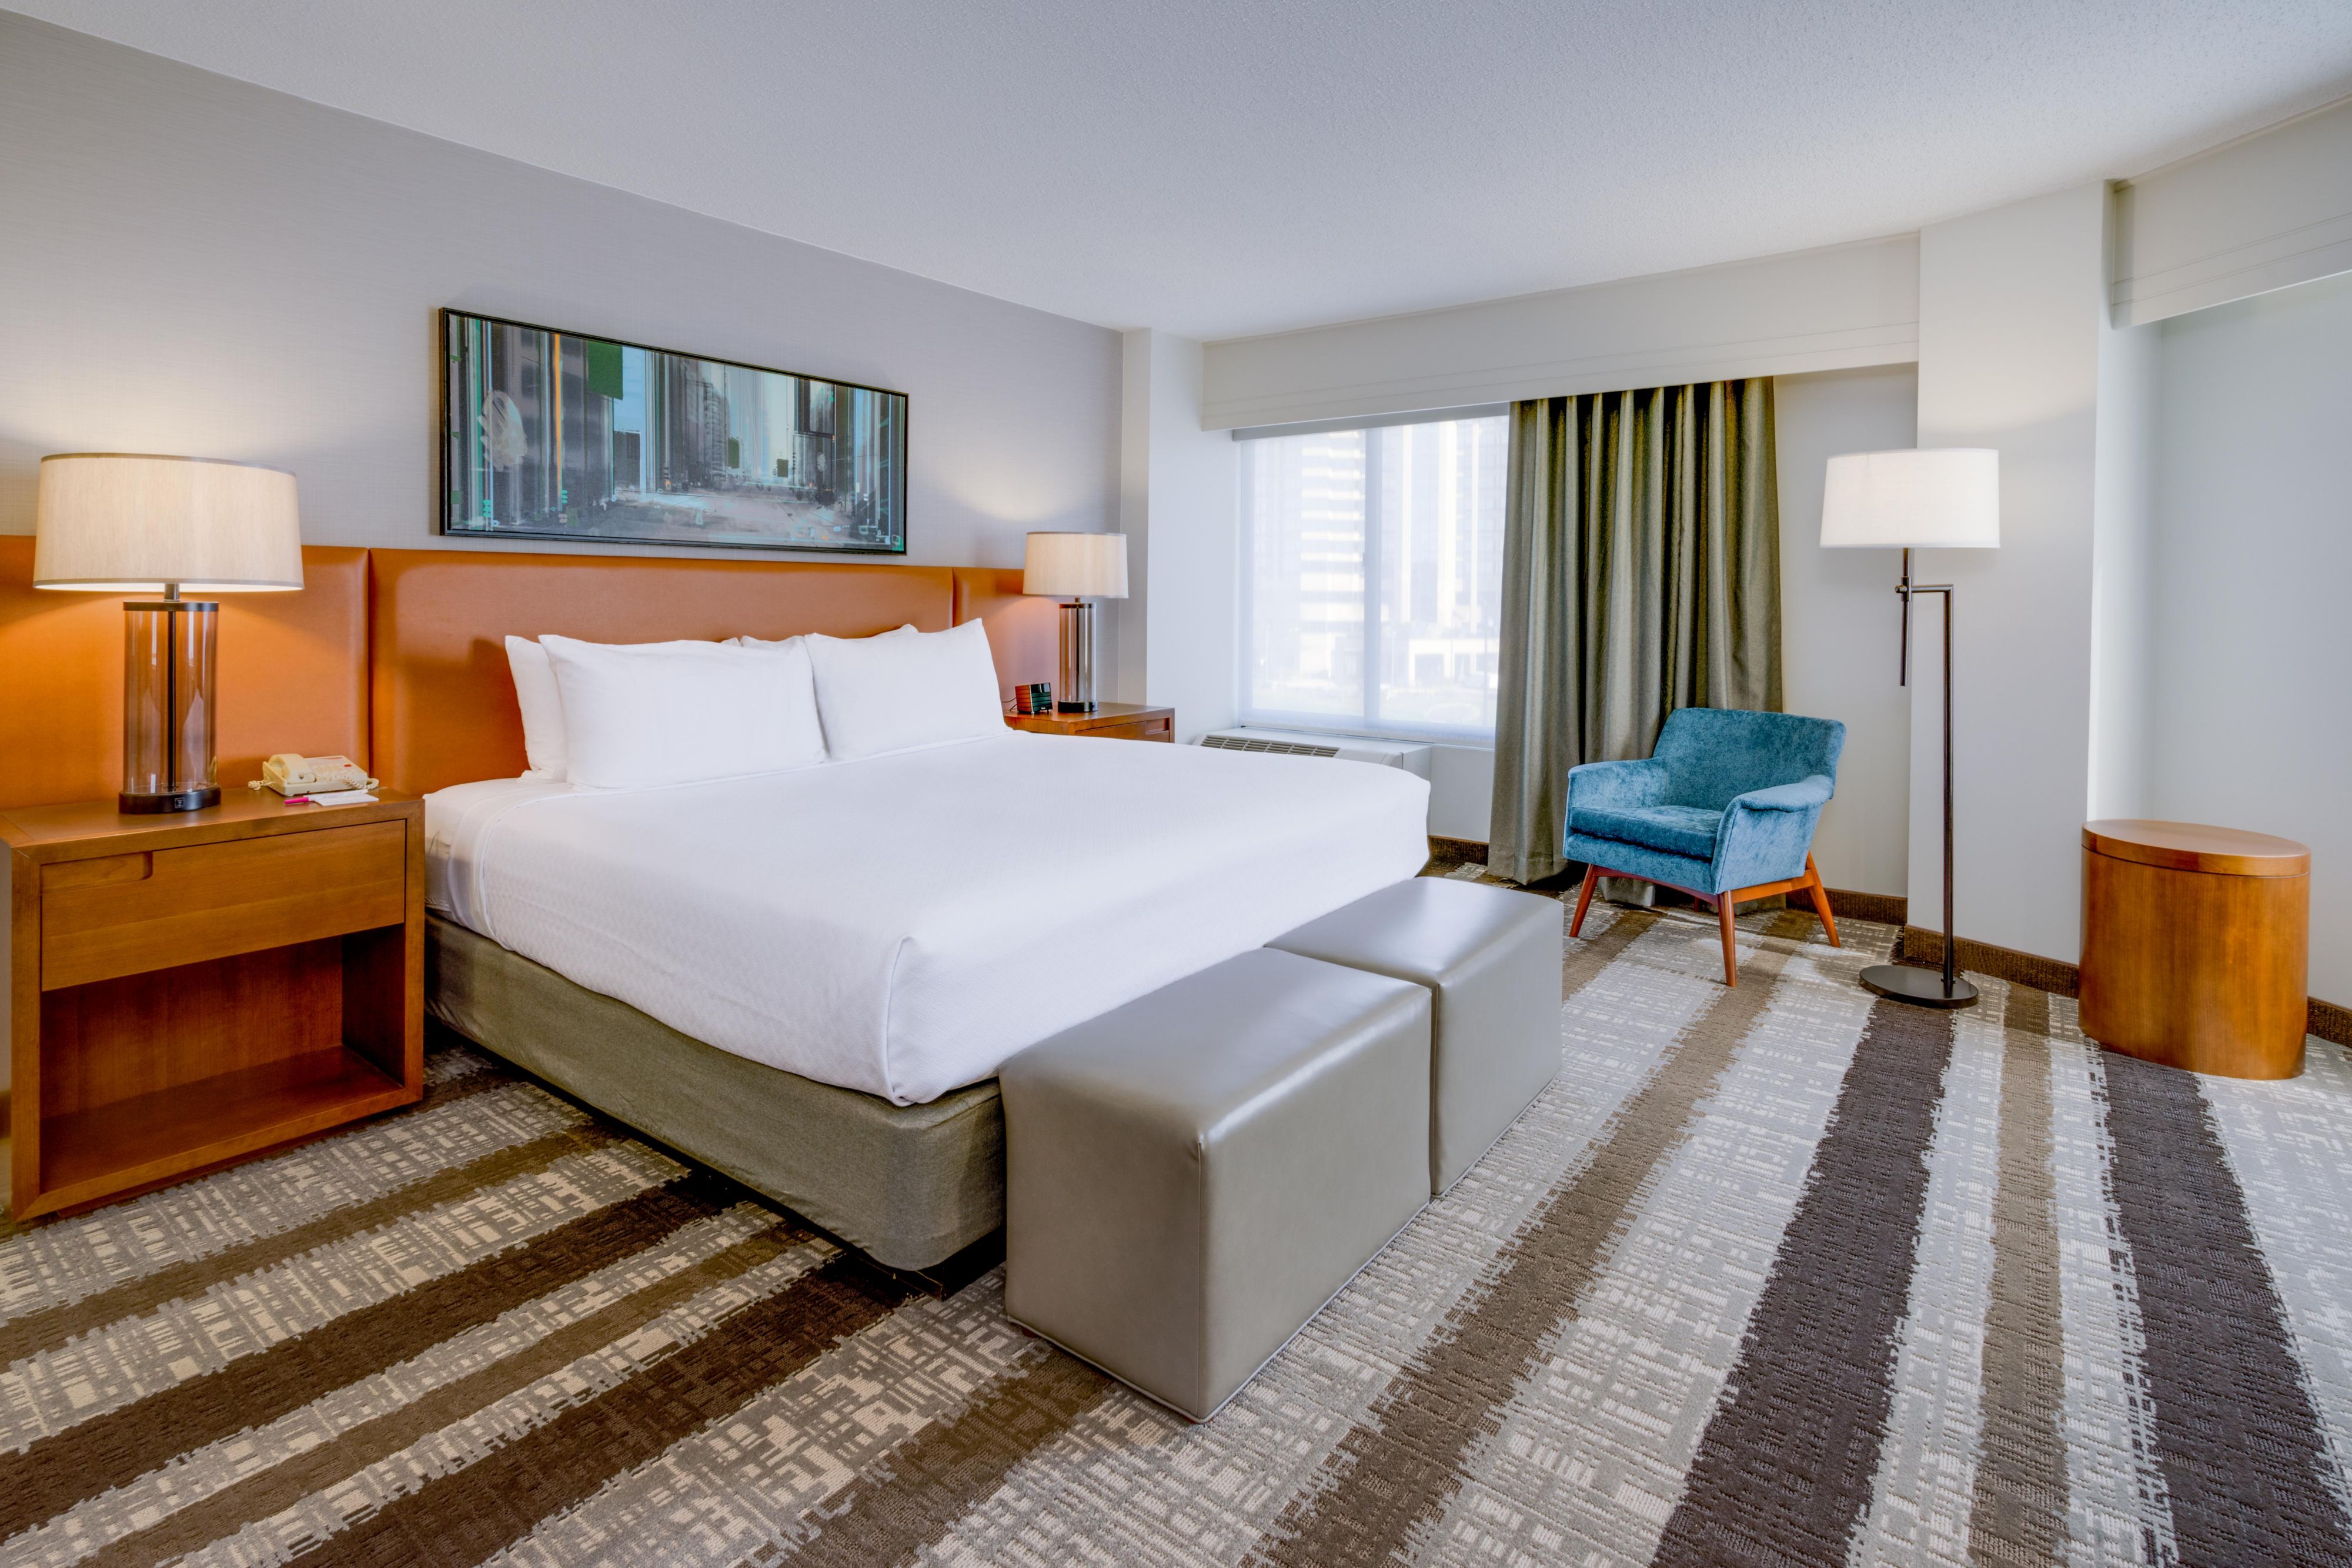 Our King Feature Rooms provide more space and special features